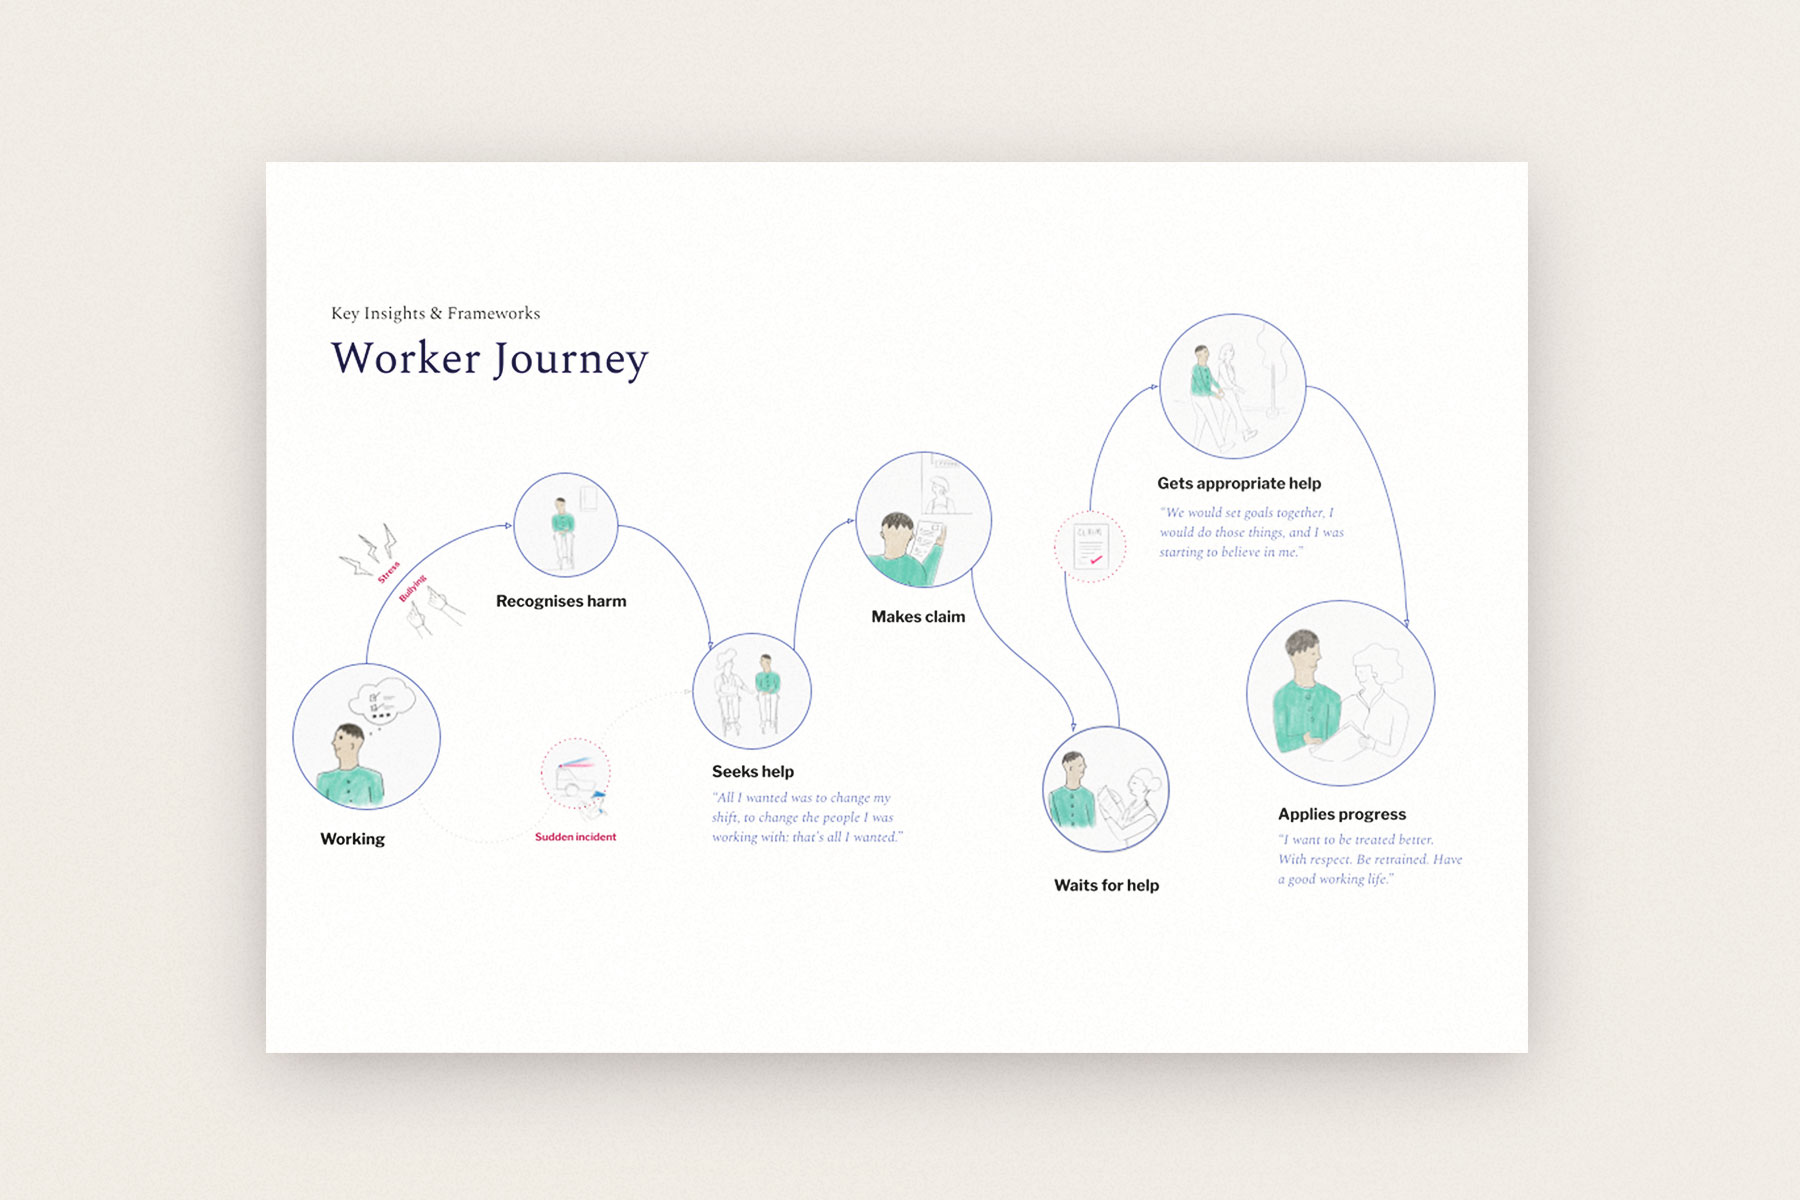 An illustration showing the keys steps of the worker journey whilst returning to work after a mental health injury. From working, to recognising harm, to seeking help, to making a claim and waiting for the outcomes of those processes.